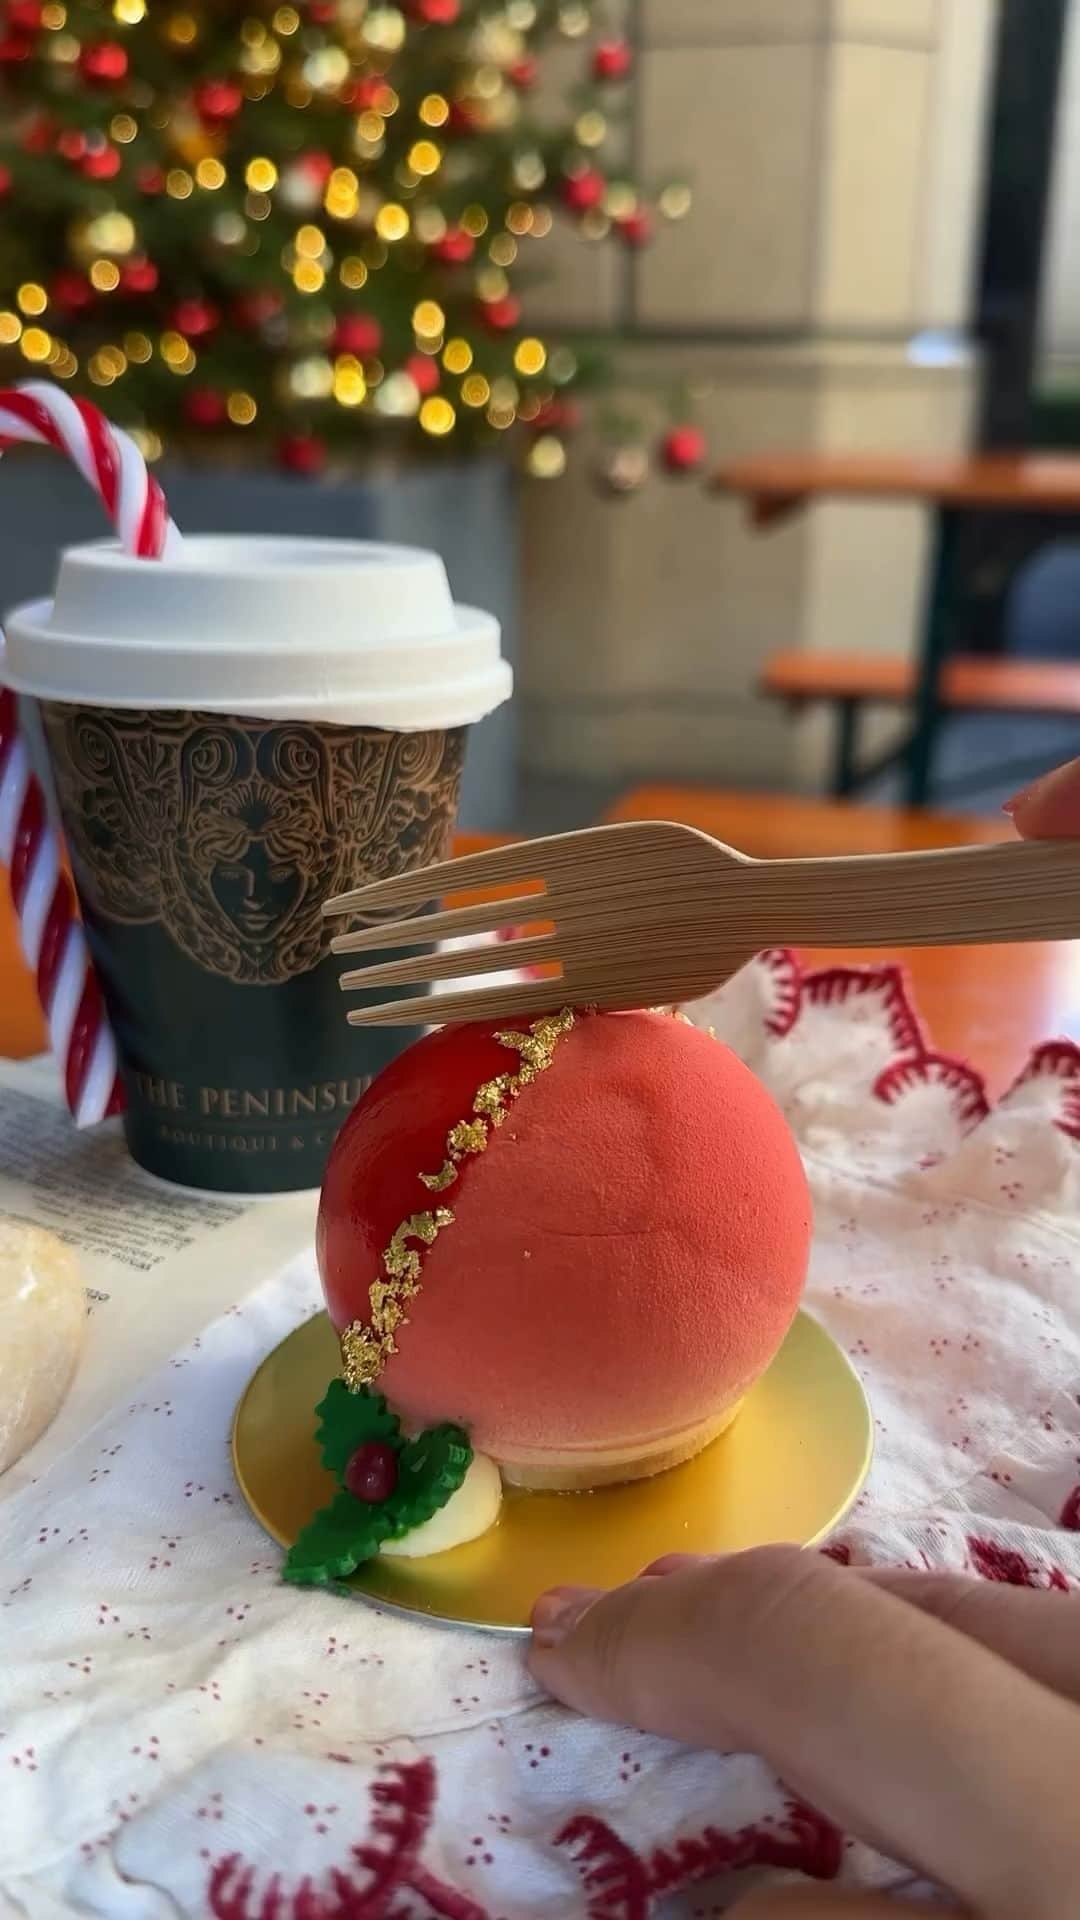 The Peninsula Tokyo/ザ・ペニンシュラ東京のインスタグラム：「クリスマスマーケットが週末とクリスマスにオープンします！🎄コーヒーやケーキなどのスイーツ、そして、世界各地のクッキーやパイなどもご用意しています。お近くにお越しの際はぜひお立ち寄りください♪ 写真クレジット： @mimisomi33  Christmas Market alert at Naka Dori Terrace! 🎄Join us for a taste of ‘Christmas Around the World.’ Cookies from Italy, pies from Britain, and more! Plus, a sparkling advent calendar countdown. Let the festive feast begin. We hope you @mimisomi33 enjoyed your experience with us!」